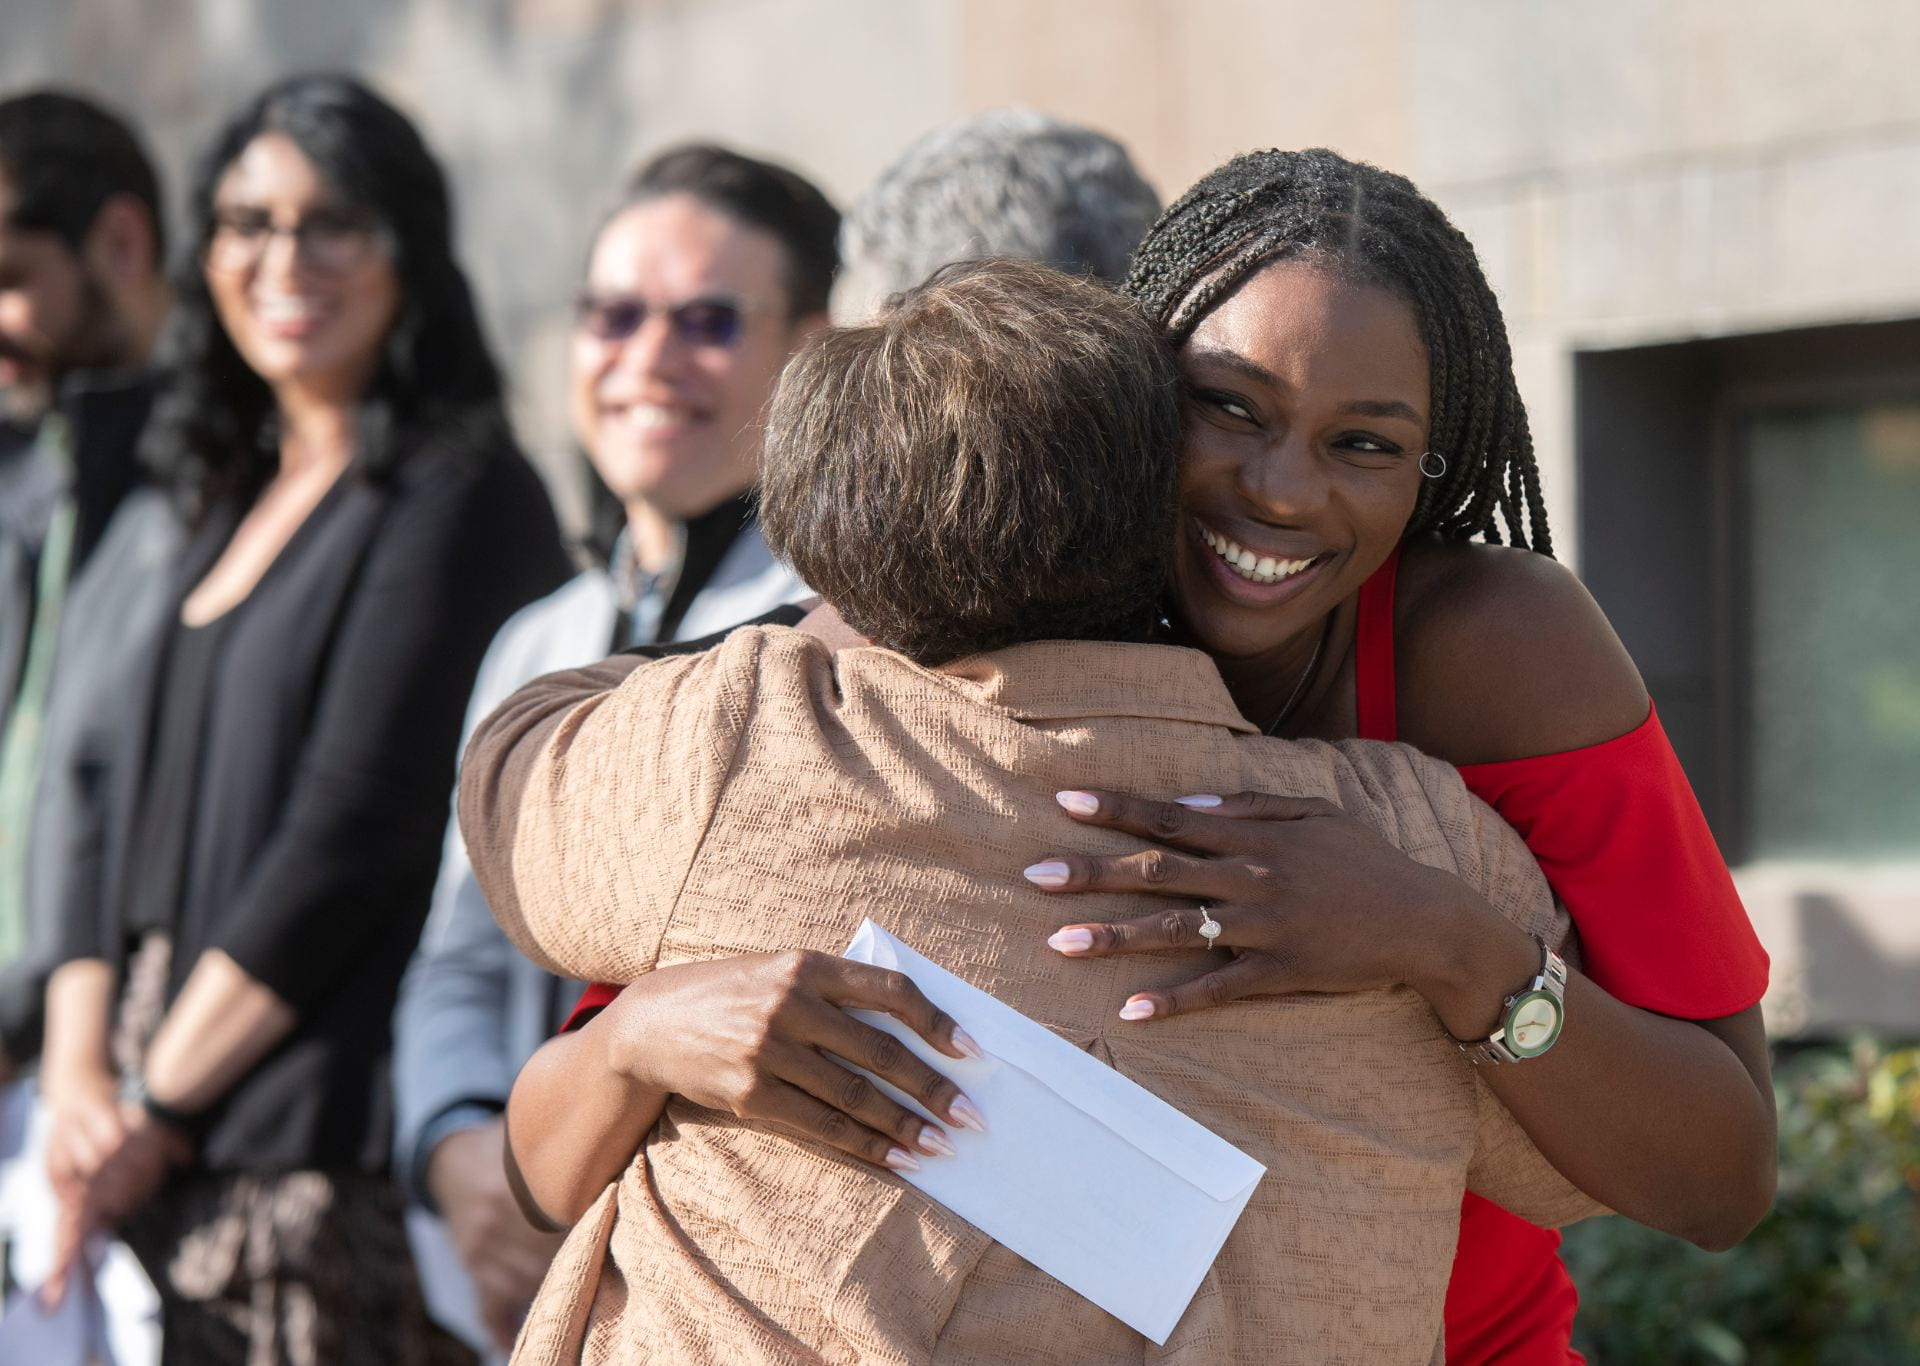 Ify Okwuosa (right) gets a congratulatory hug from Dr. Carol Major at Friday’s Match Day ceremony. She’ll be going into internal medicine at UCLA.